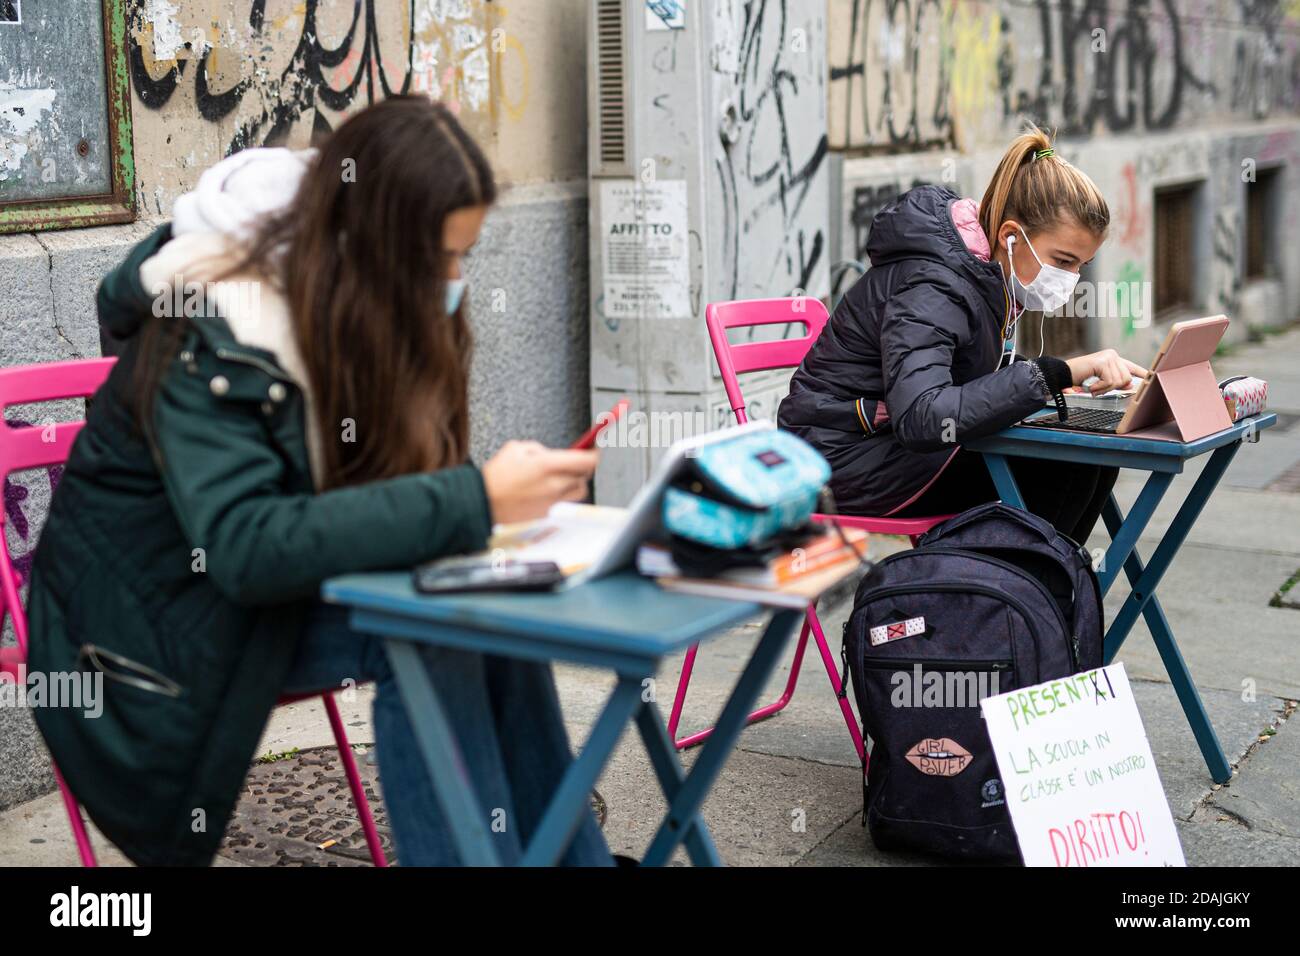 TURIN, ITALY - November 13, 2020: Two students of secondary school Calvino, called Anita and Lisa, follow a distance learning (DaD) lesson on the street outside their school to protest against schools closures imposed by the government due to an increase in COVID-19 coronavirus disease infections. Anita has been protesting every school day since November 6 when Piedmont became a red zone, a day later Lisa joined her. On November 11 Anita received a solidarity call from the Italian Minister of Education Lucia Azzolina. (Photo by Nicol Stock Photo